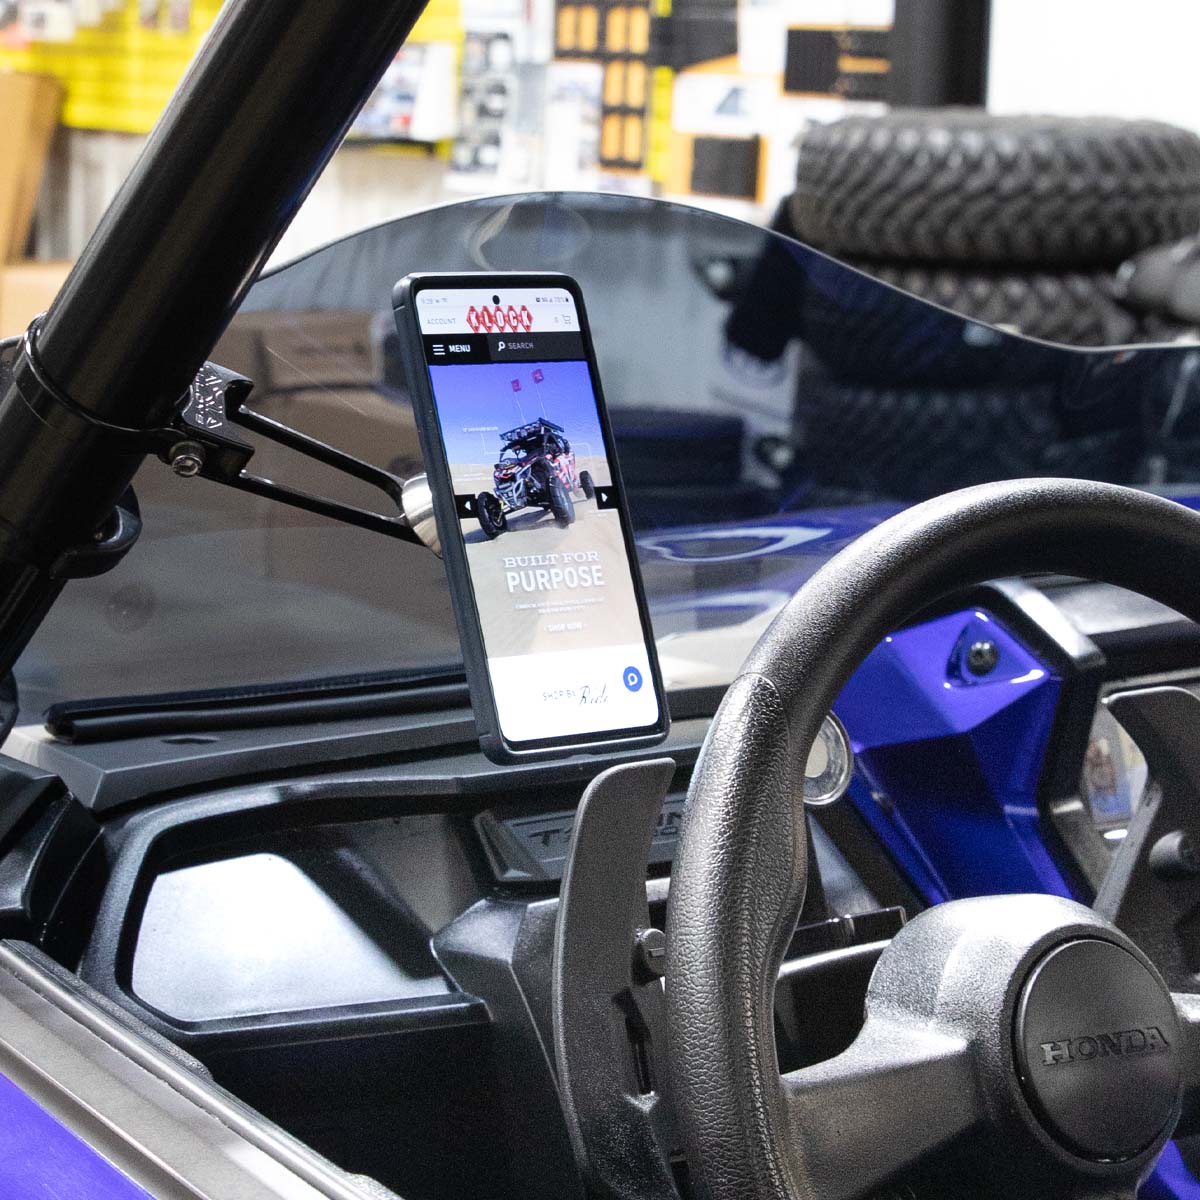 2" Offset Roll Cage Magnetic Phone Mount shown on KHonda Talon side by side(2" Mount shown on Honda Talon)